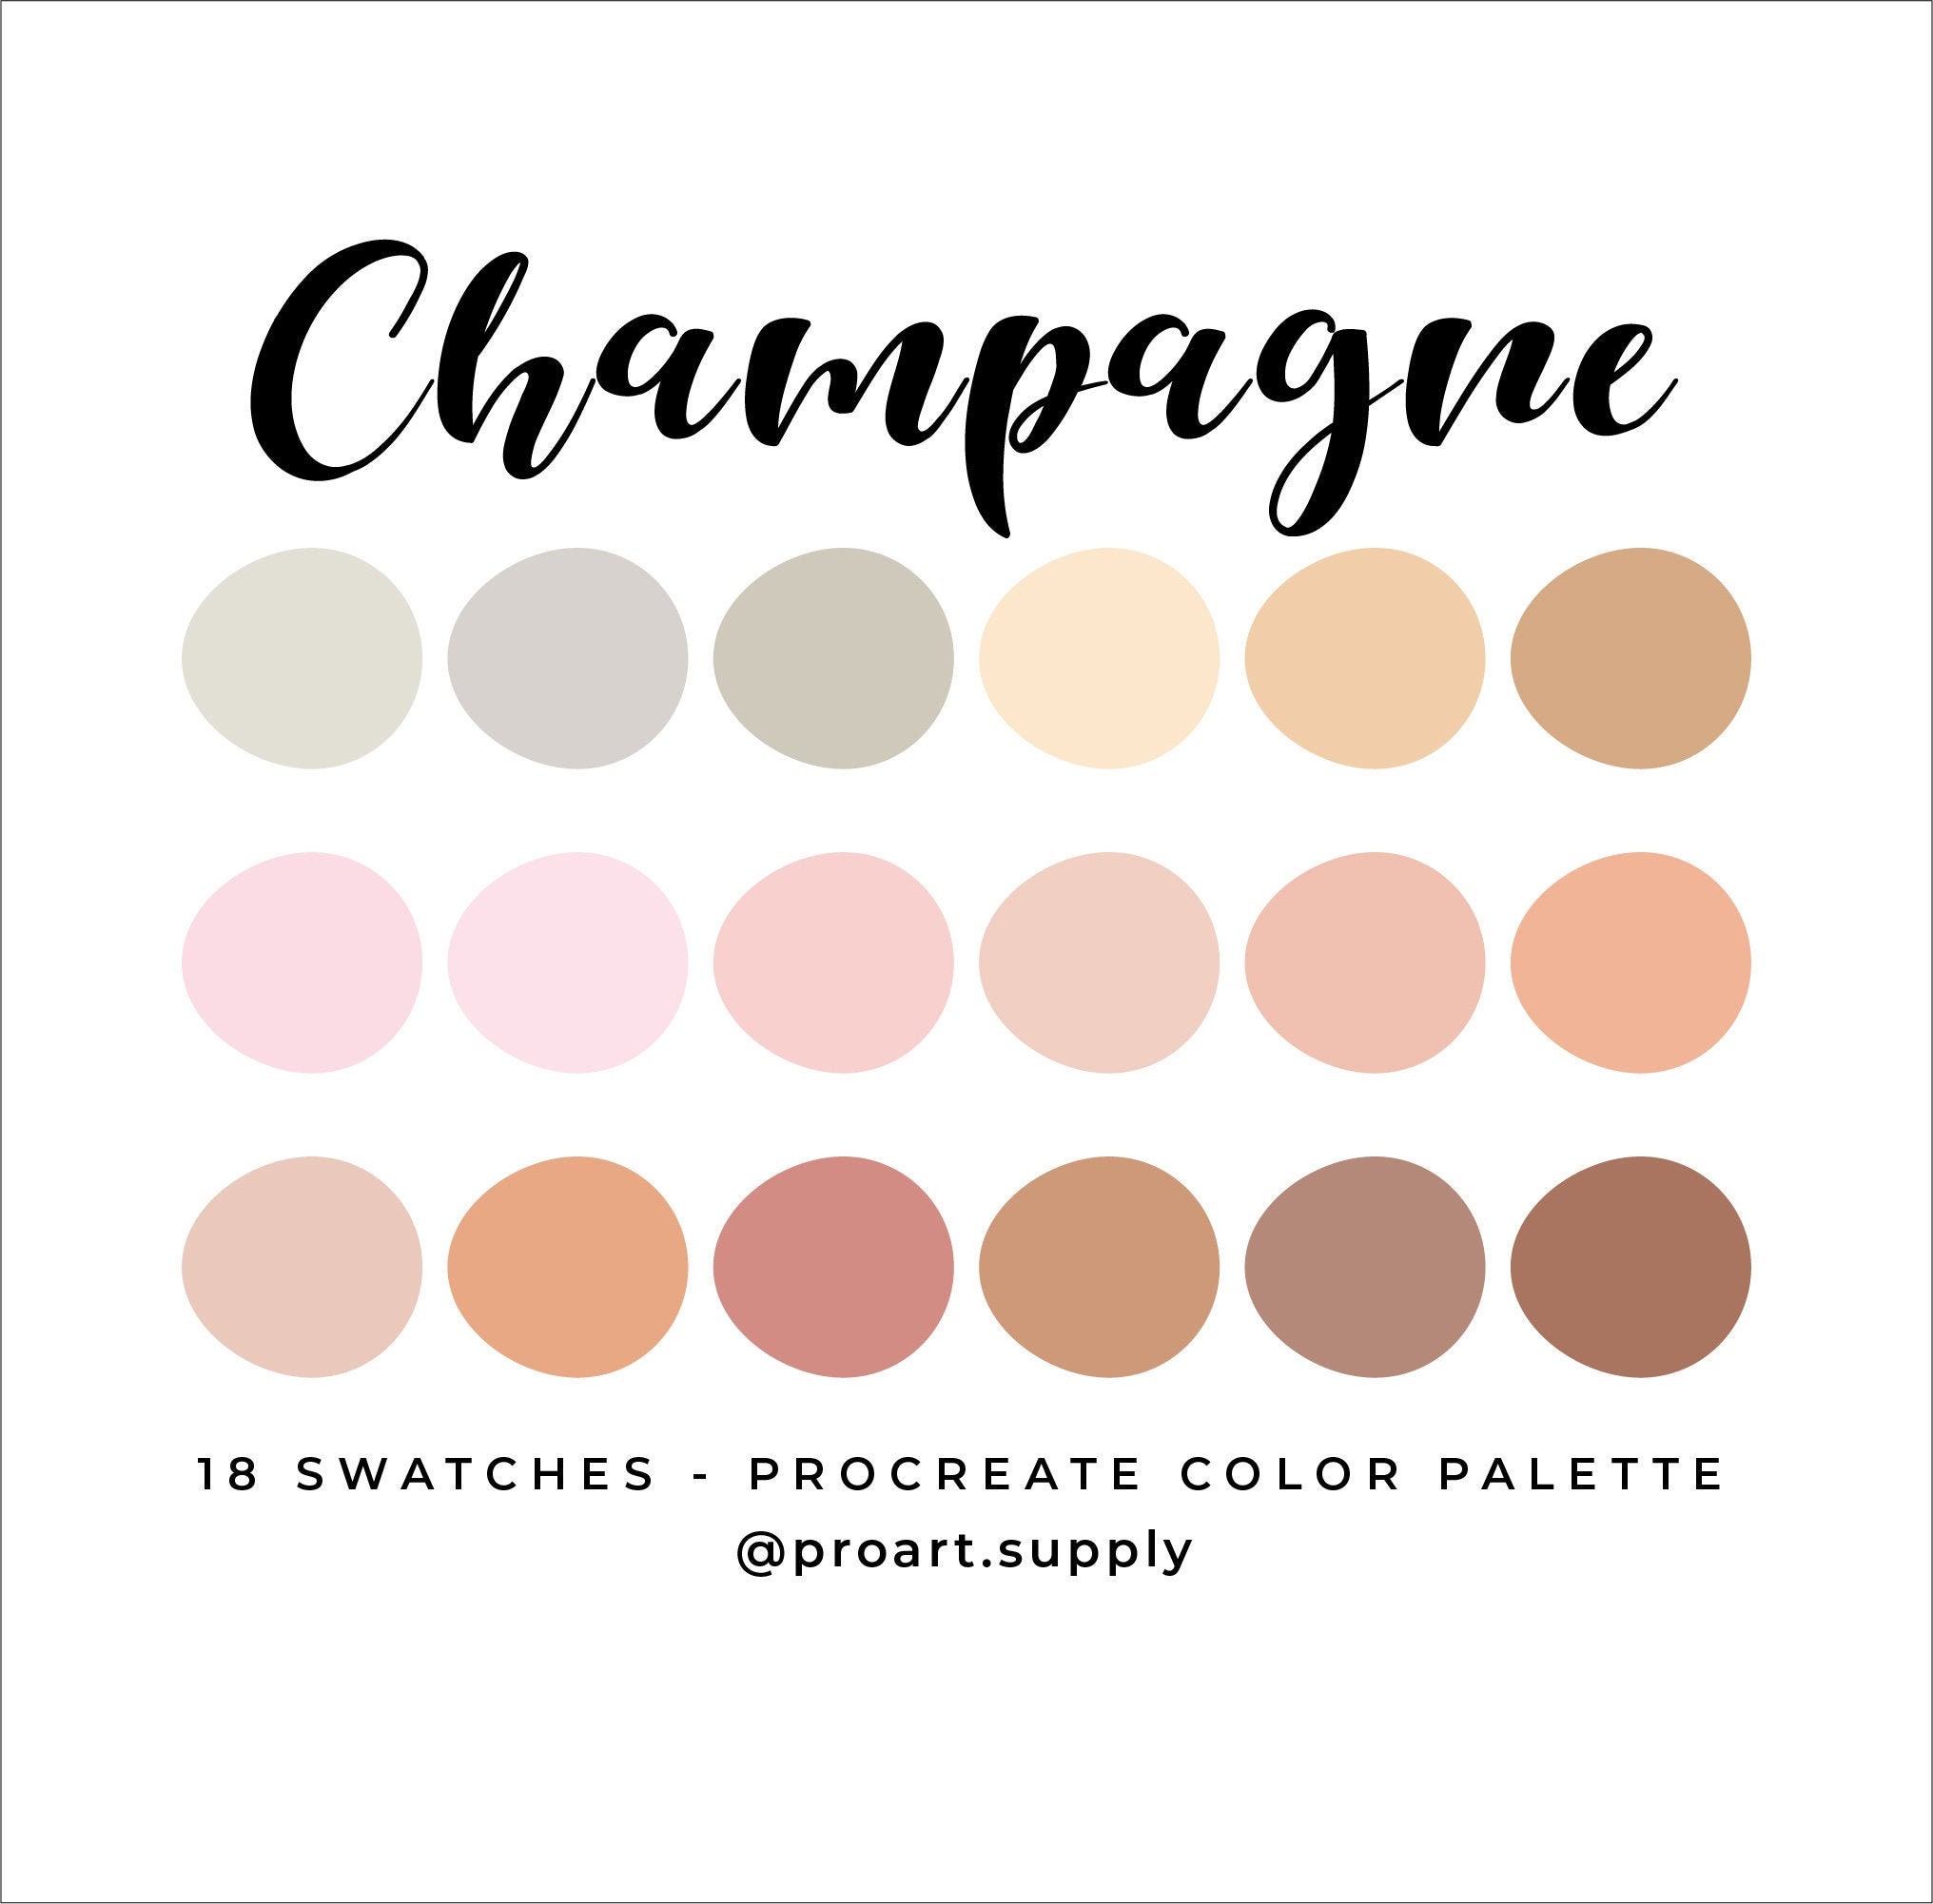 champagne paint swatch